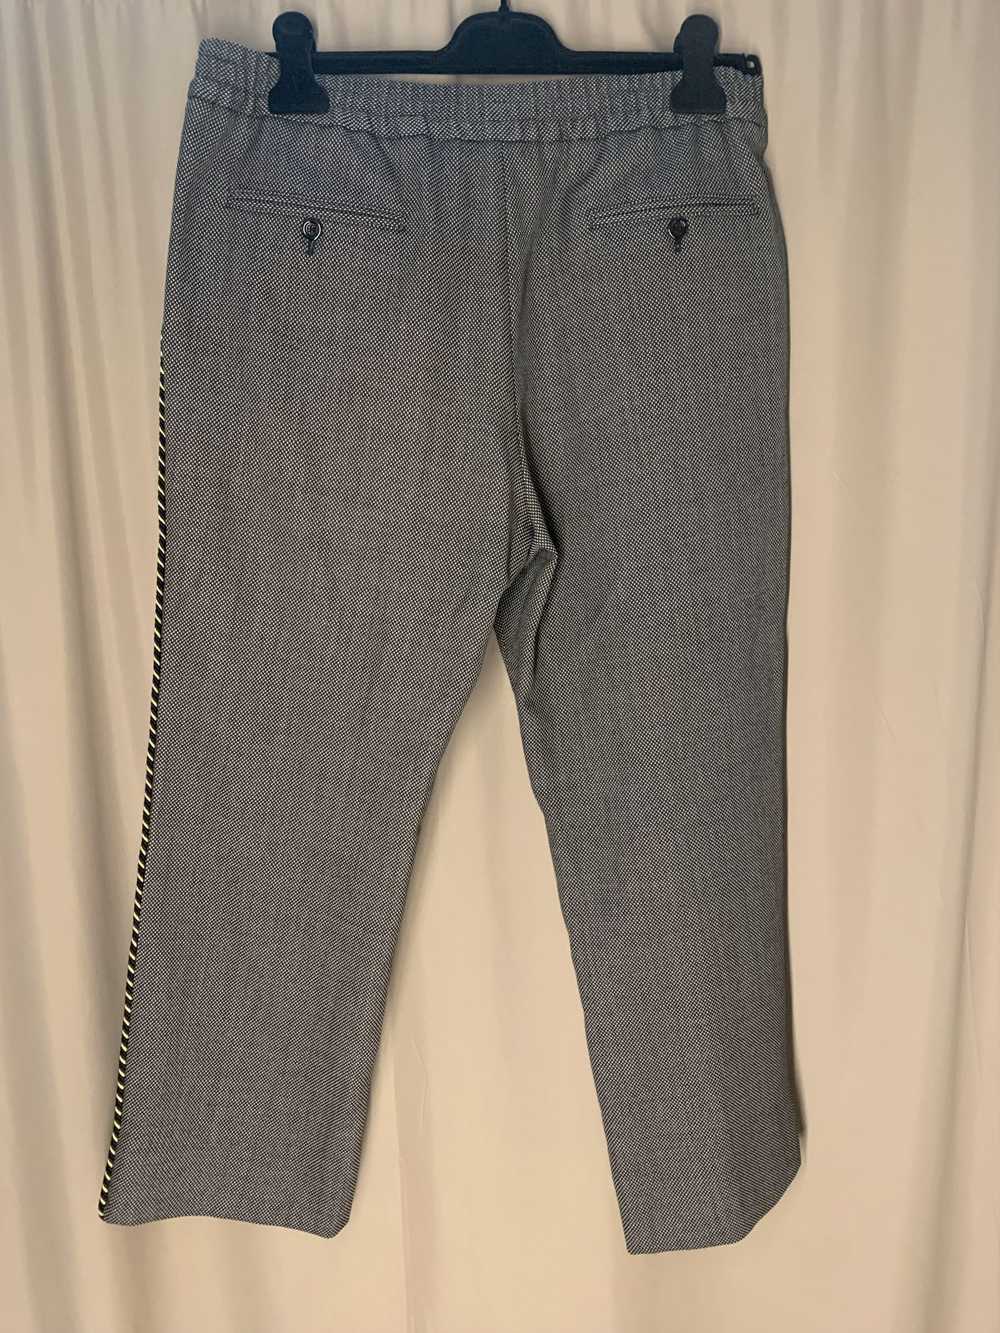 Gucci Casual Drawstring Trousers - image 2